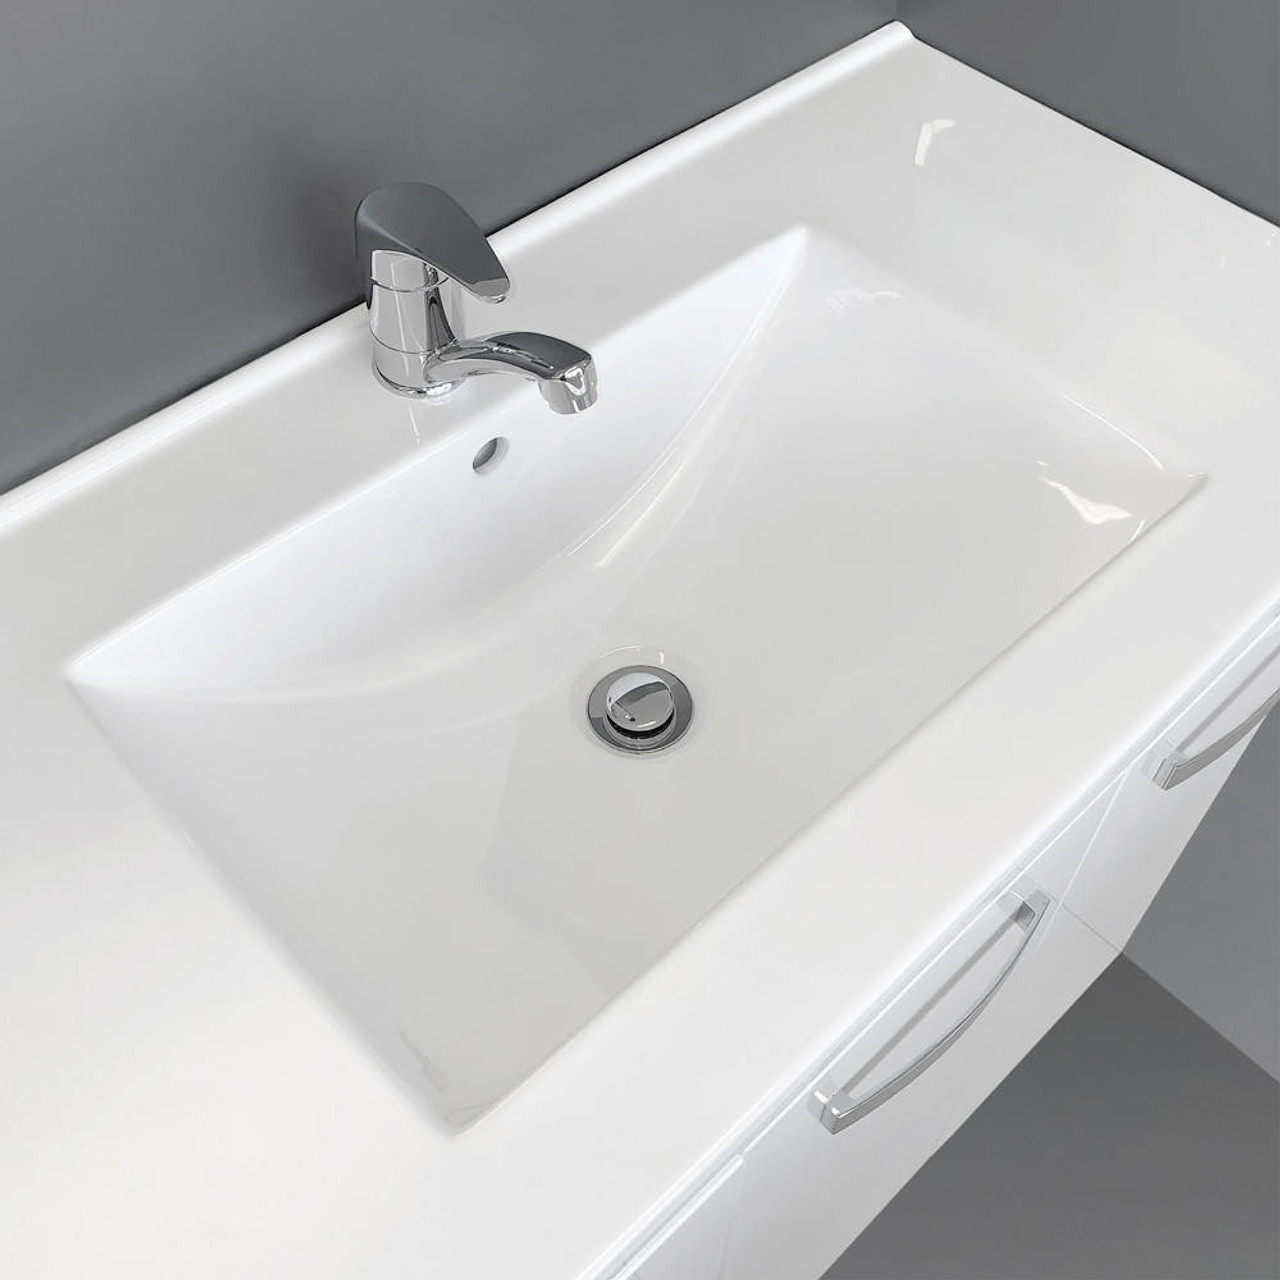 Fienza Hampton Wall Hung Vanity 900mm Dolce Ceramic Moulded Basin Top TCL90T